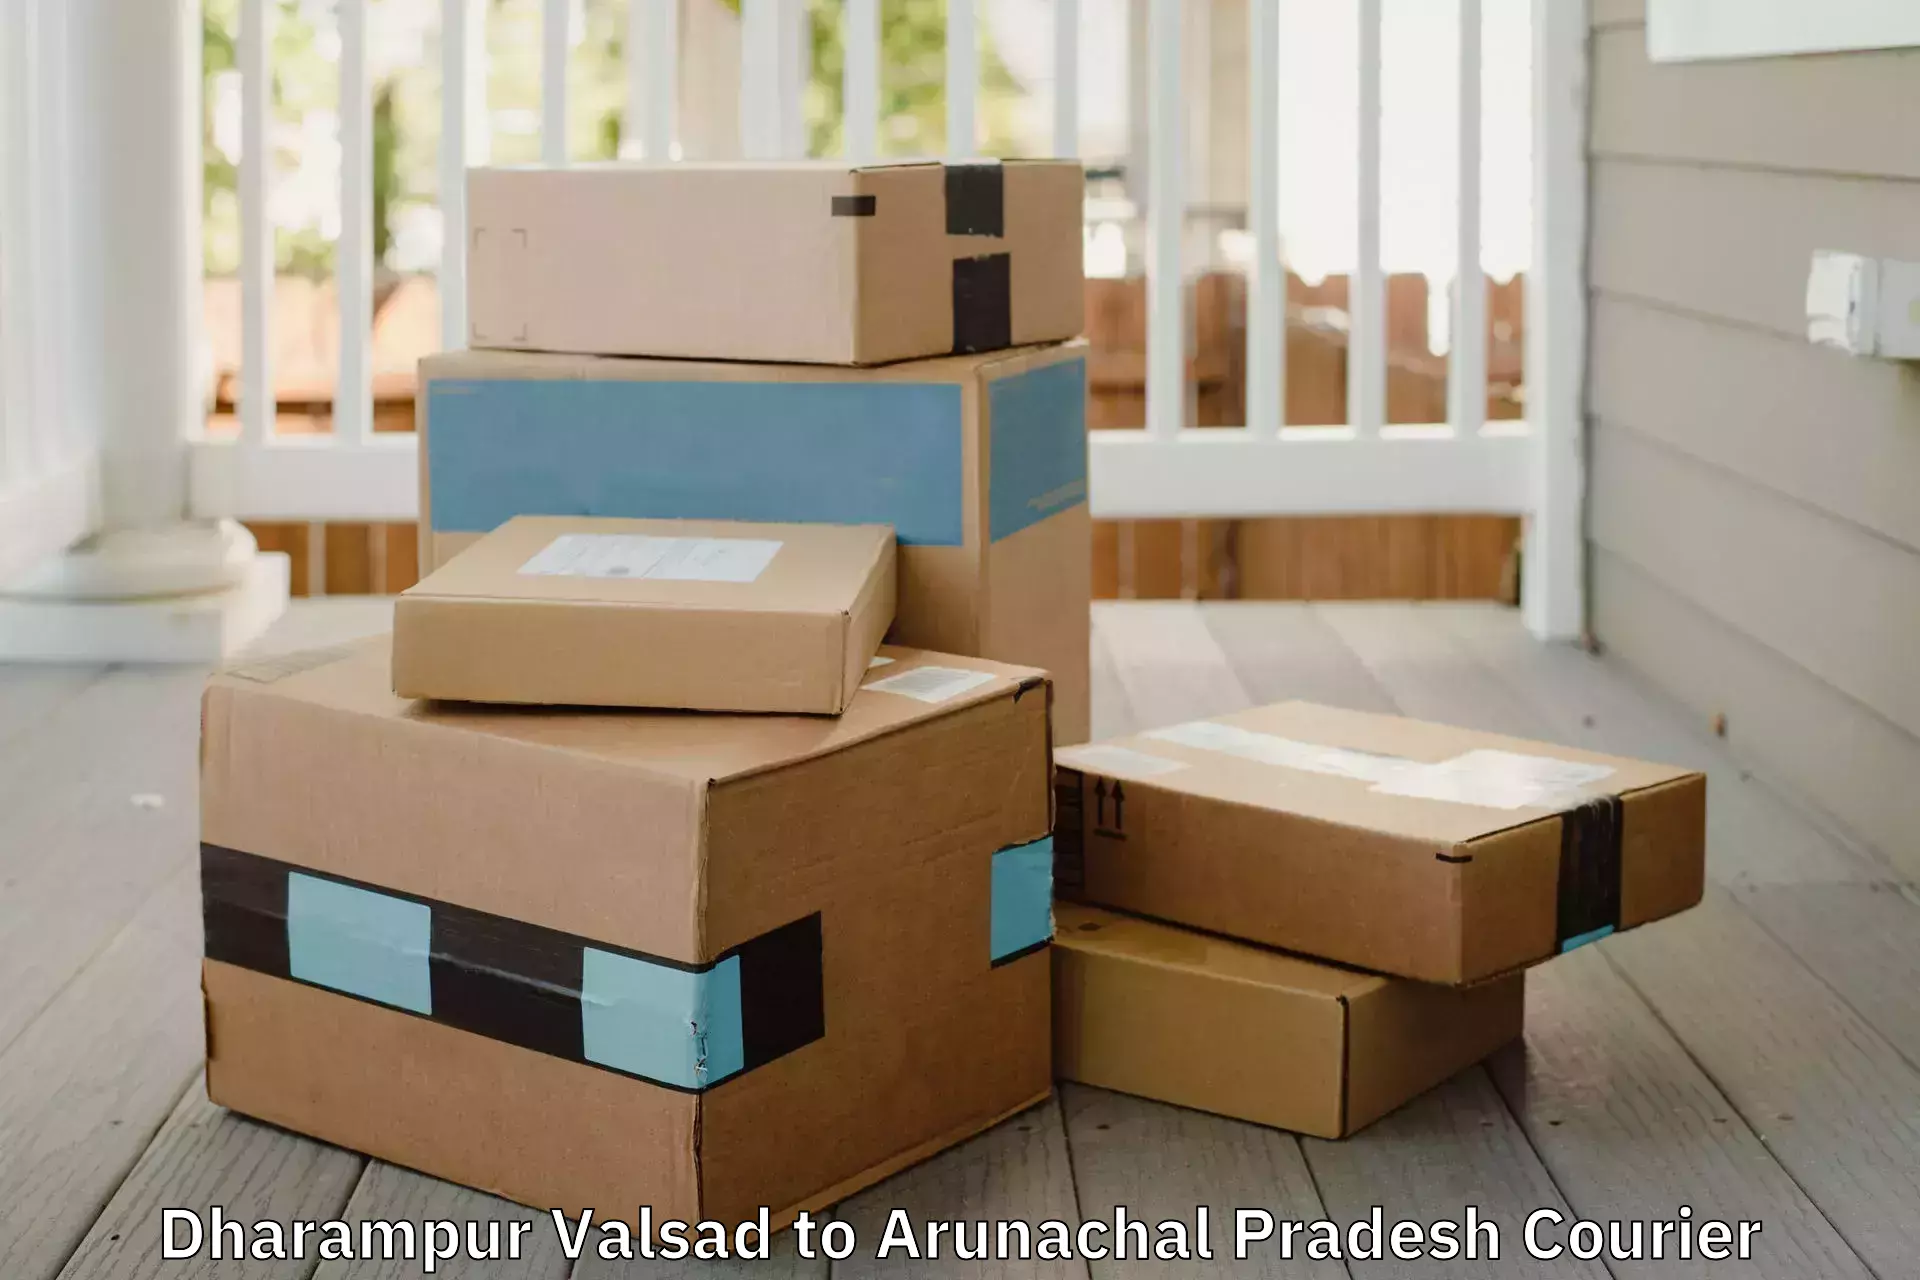 Furniture transport specialists Dharampur Valsad to Basar